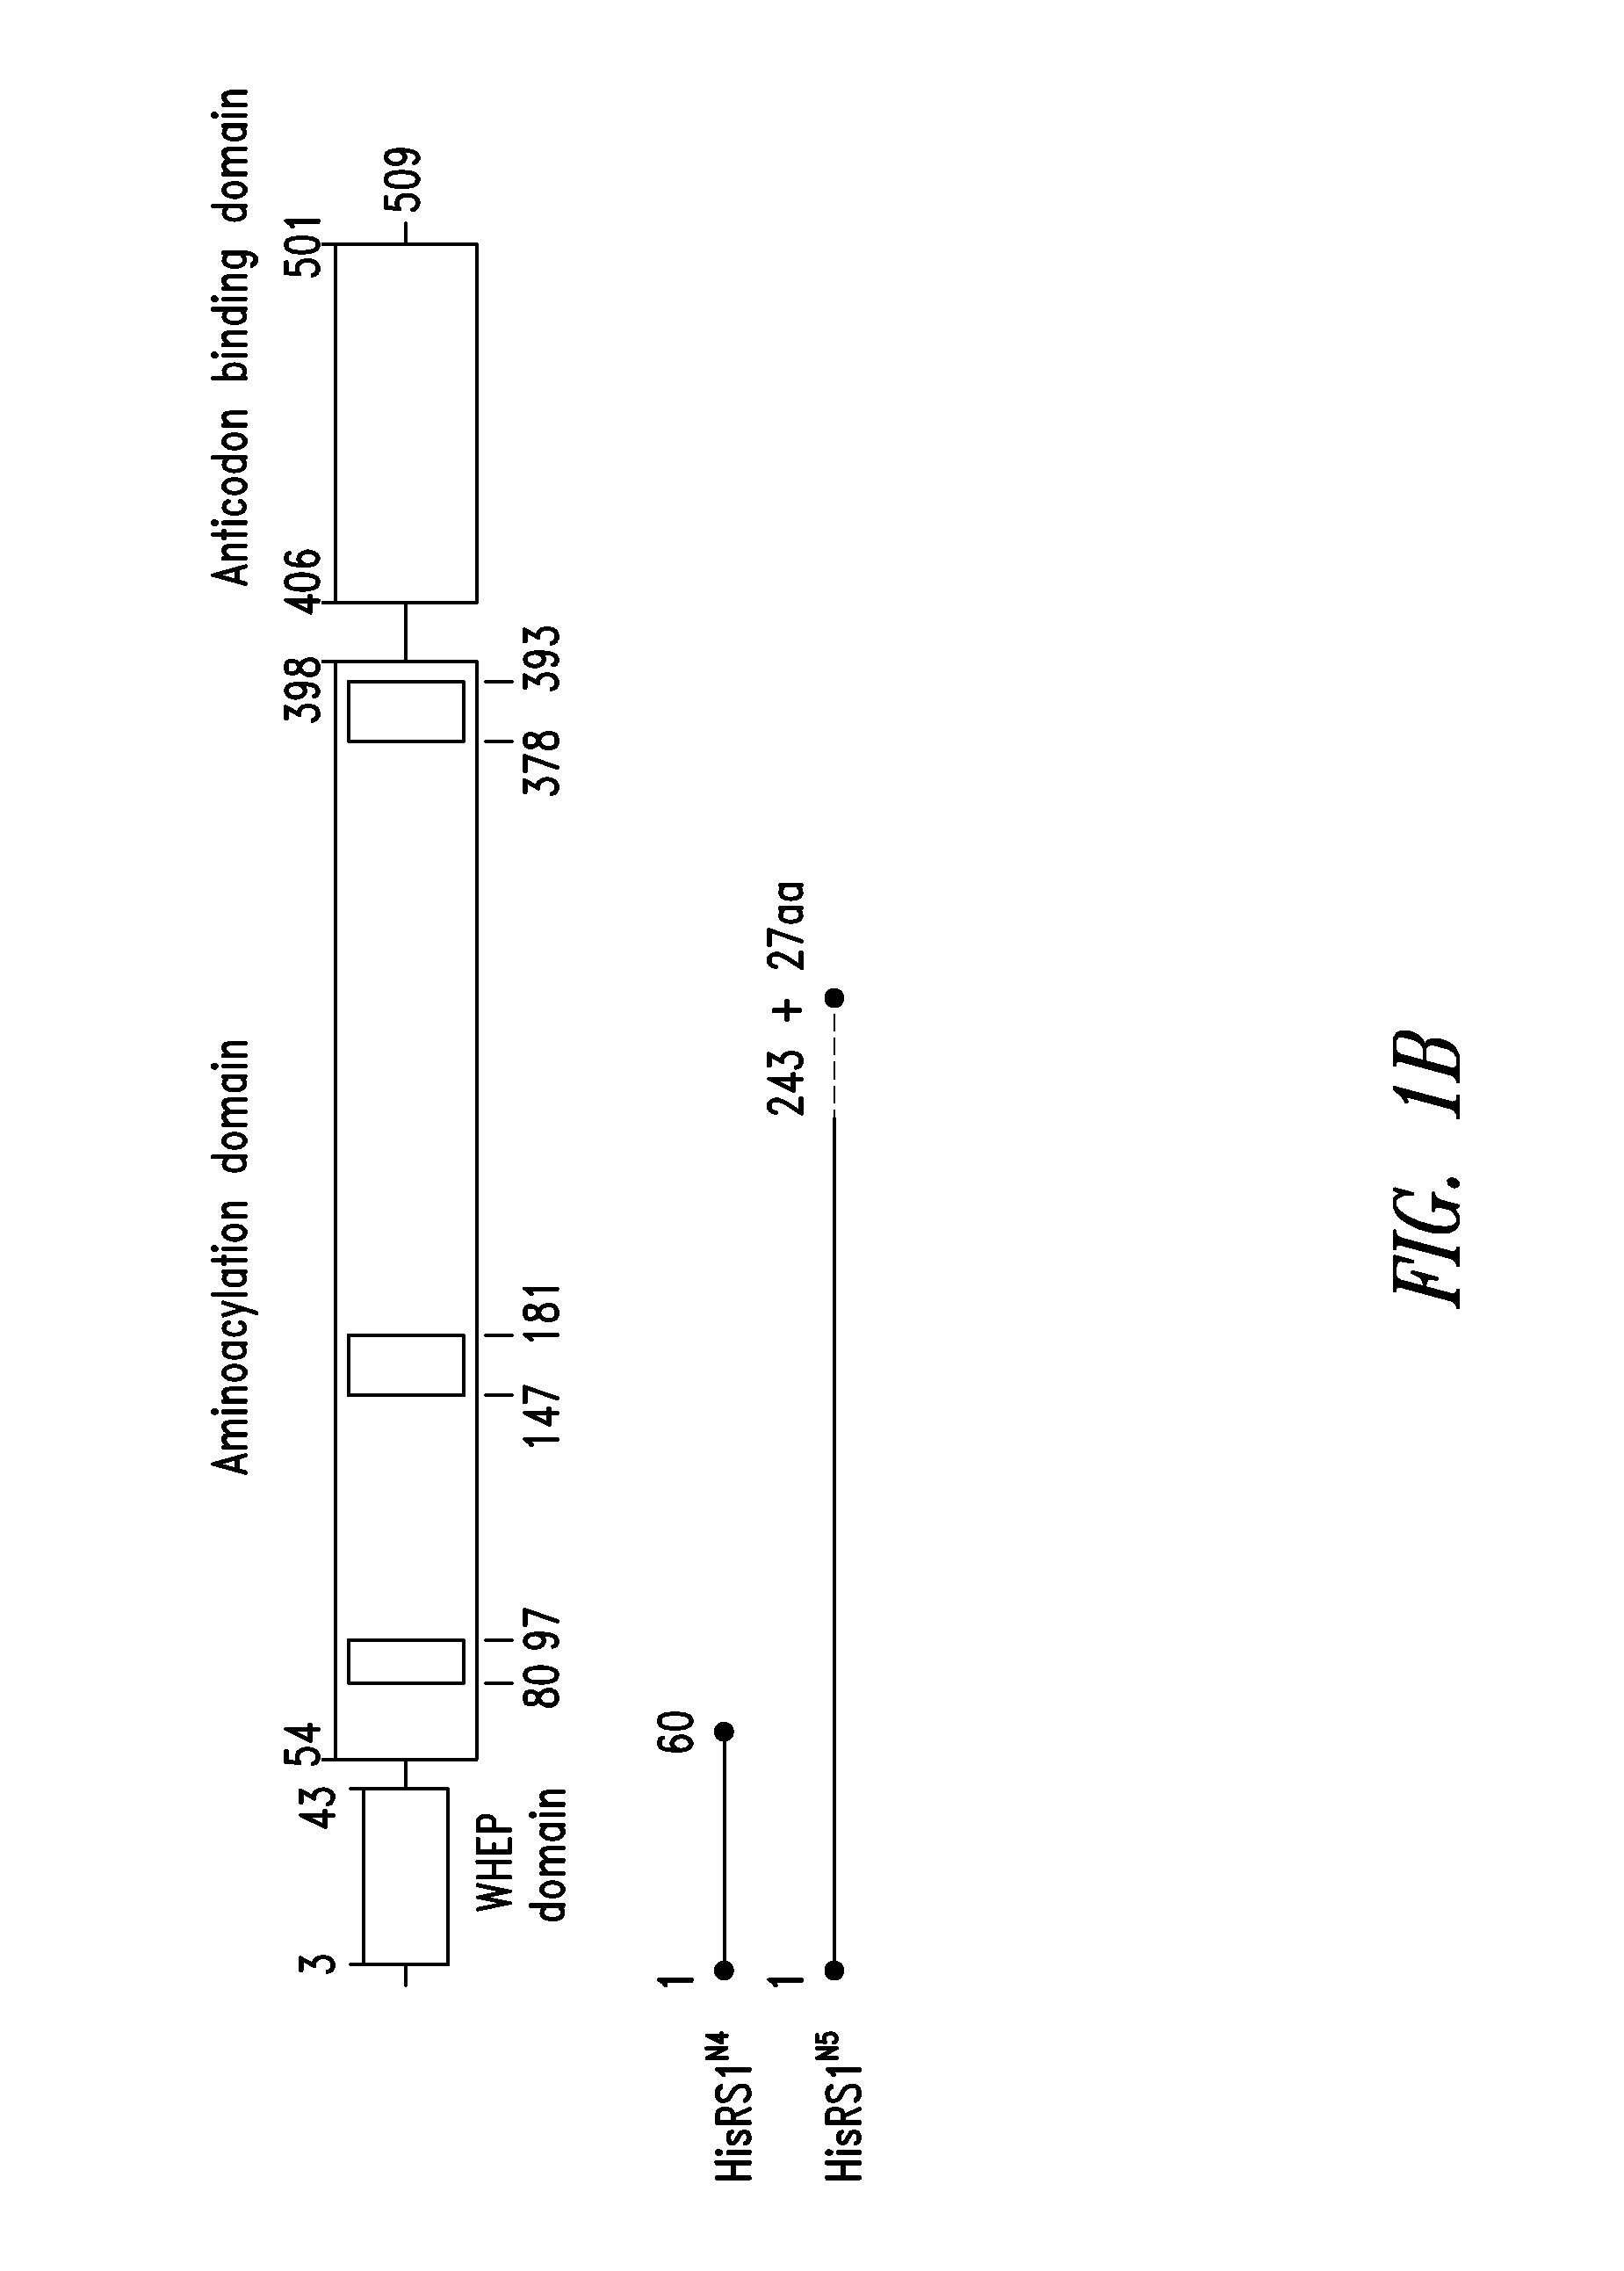 Innovative discovery of therapeutic, diagnostic, and antibody compositions related to protein fragments of histidyl-trna synthetases